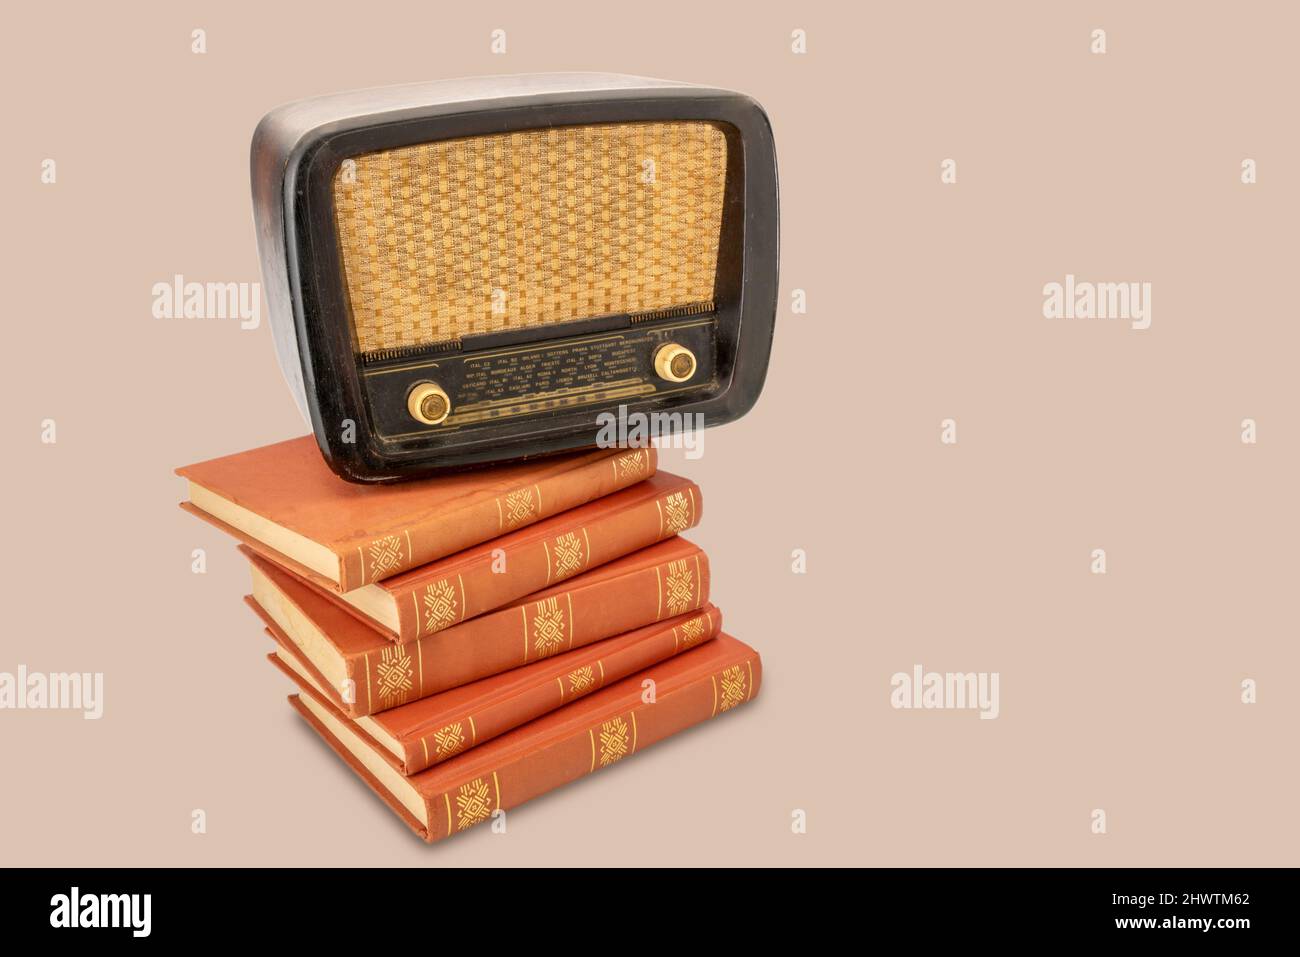 Vintage tube radio1950s 20th century on old books with golden decorations, isolated on light brown background, copy space Stock Photo